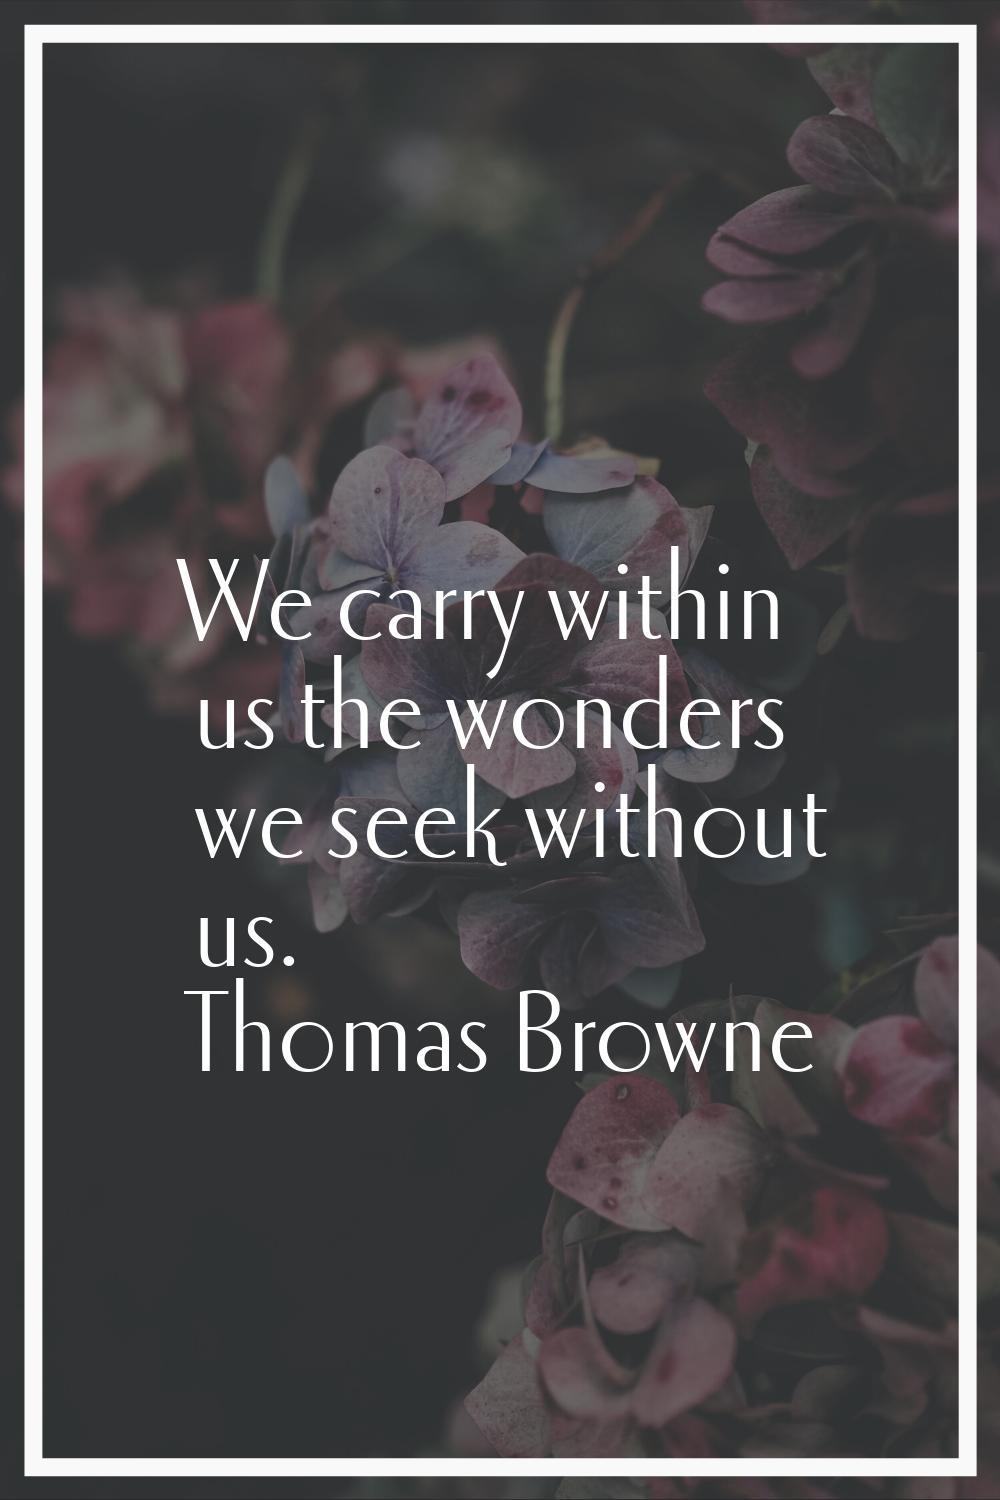 We carry within us the wonders we seek without us.